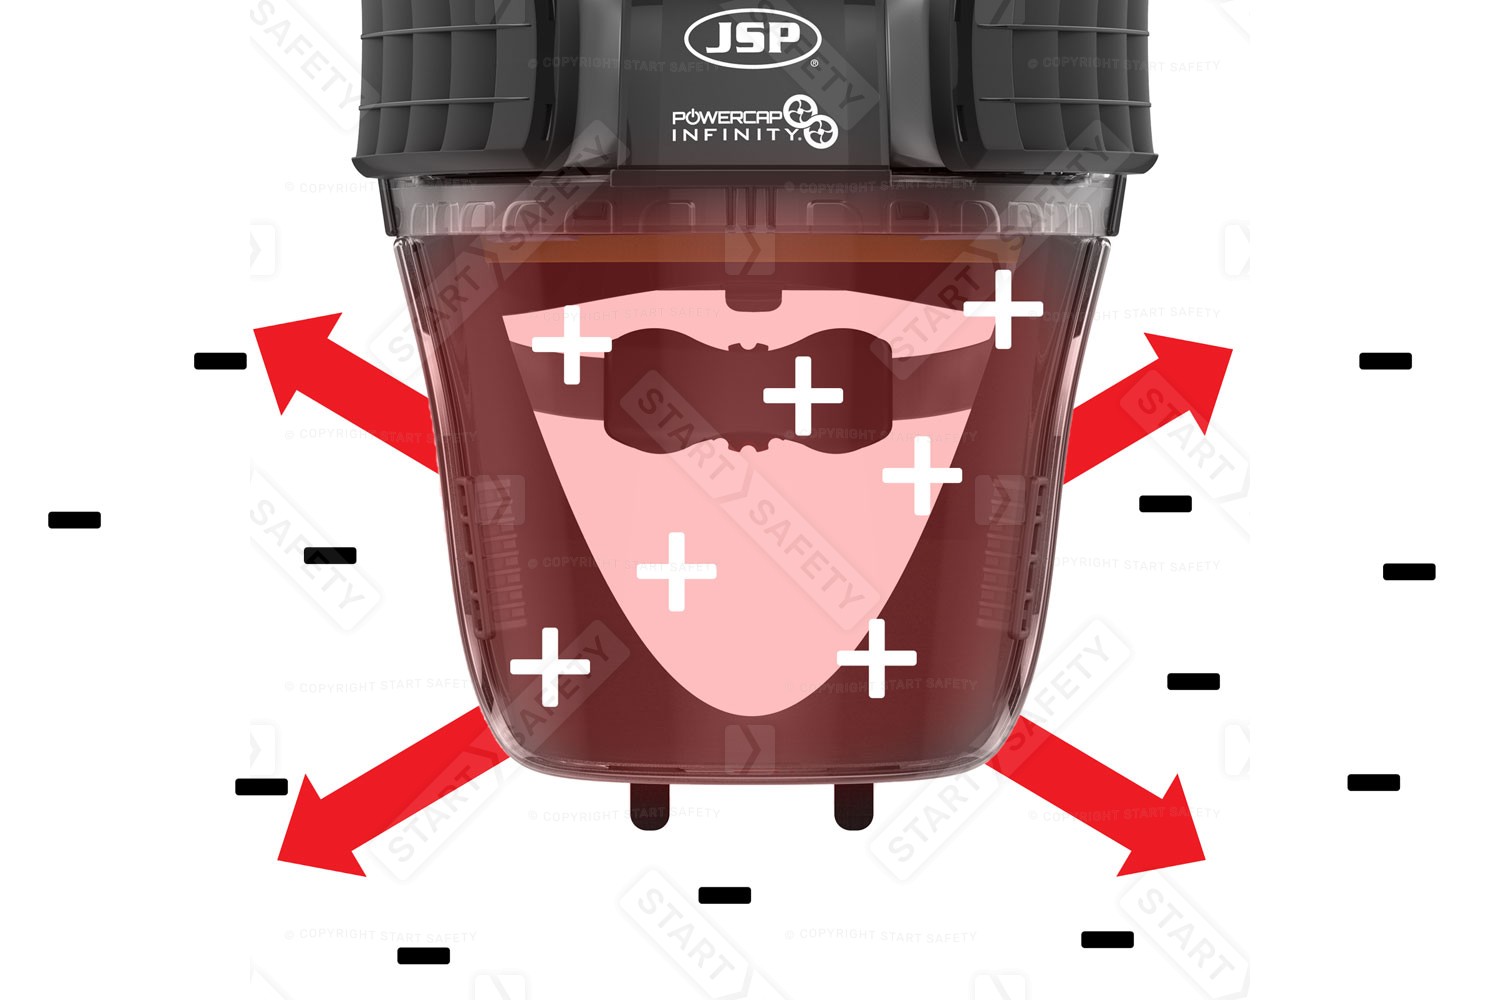 Positive Air Pressure In A Powered Respirator